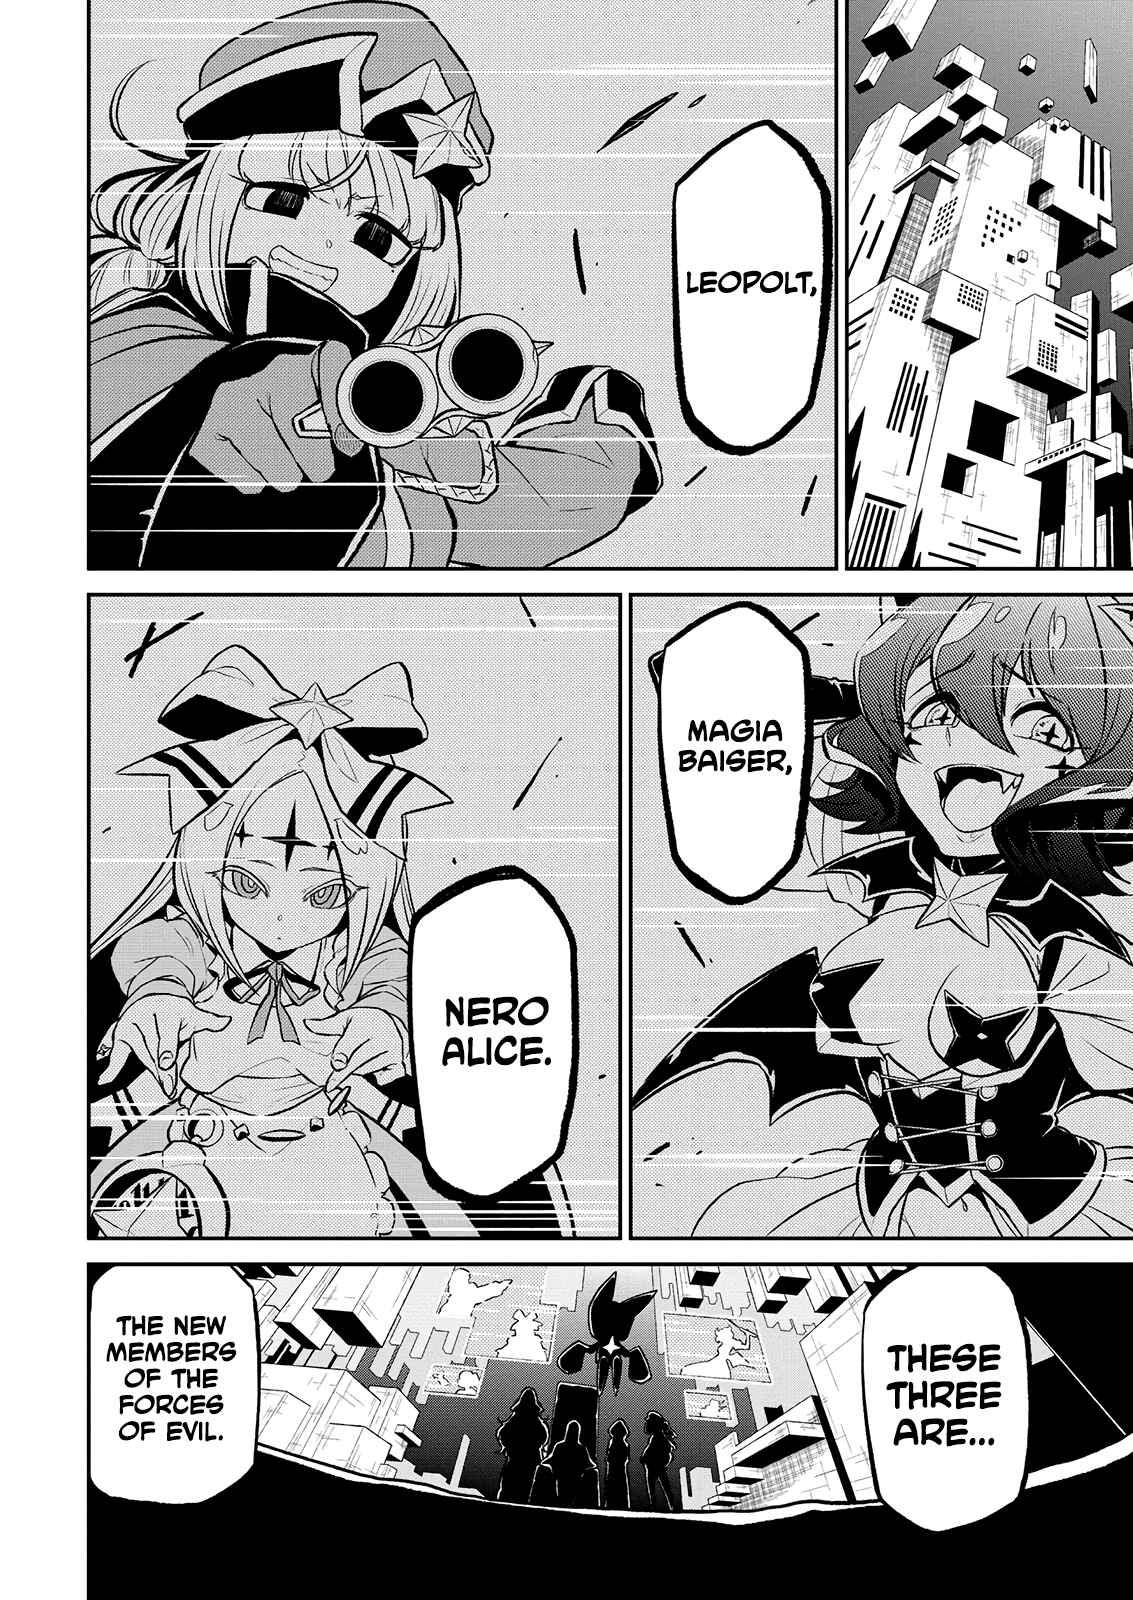 Looking Up To Magical Girls Vol. 2 Ch. 11